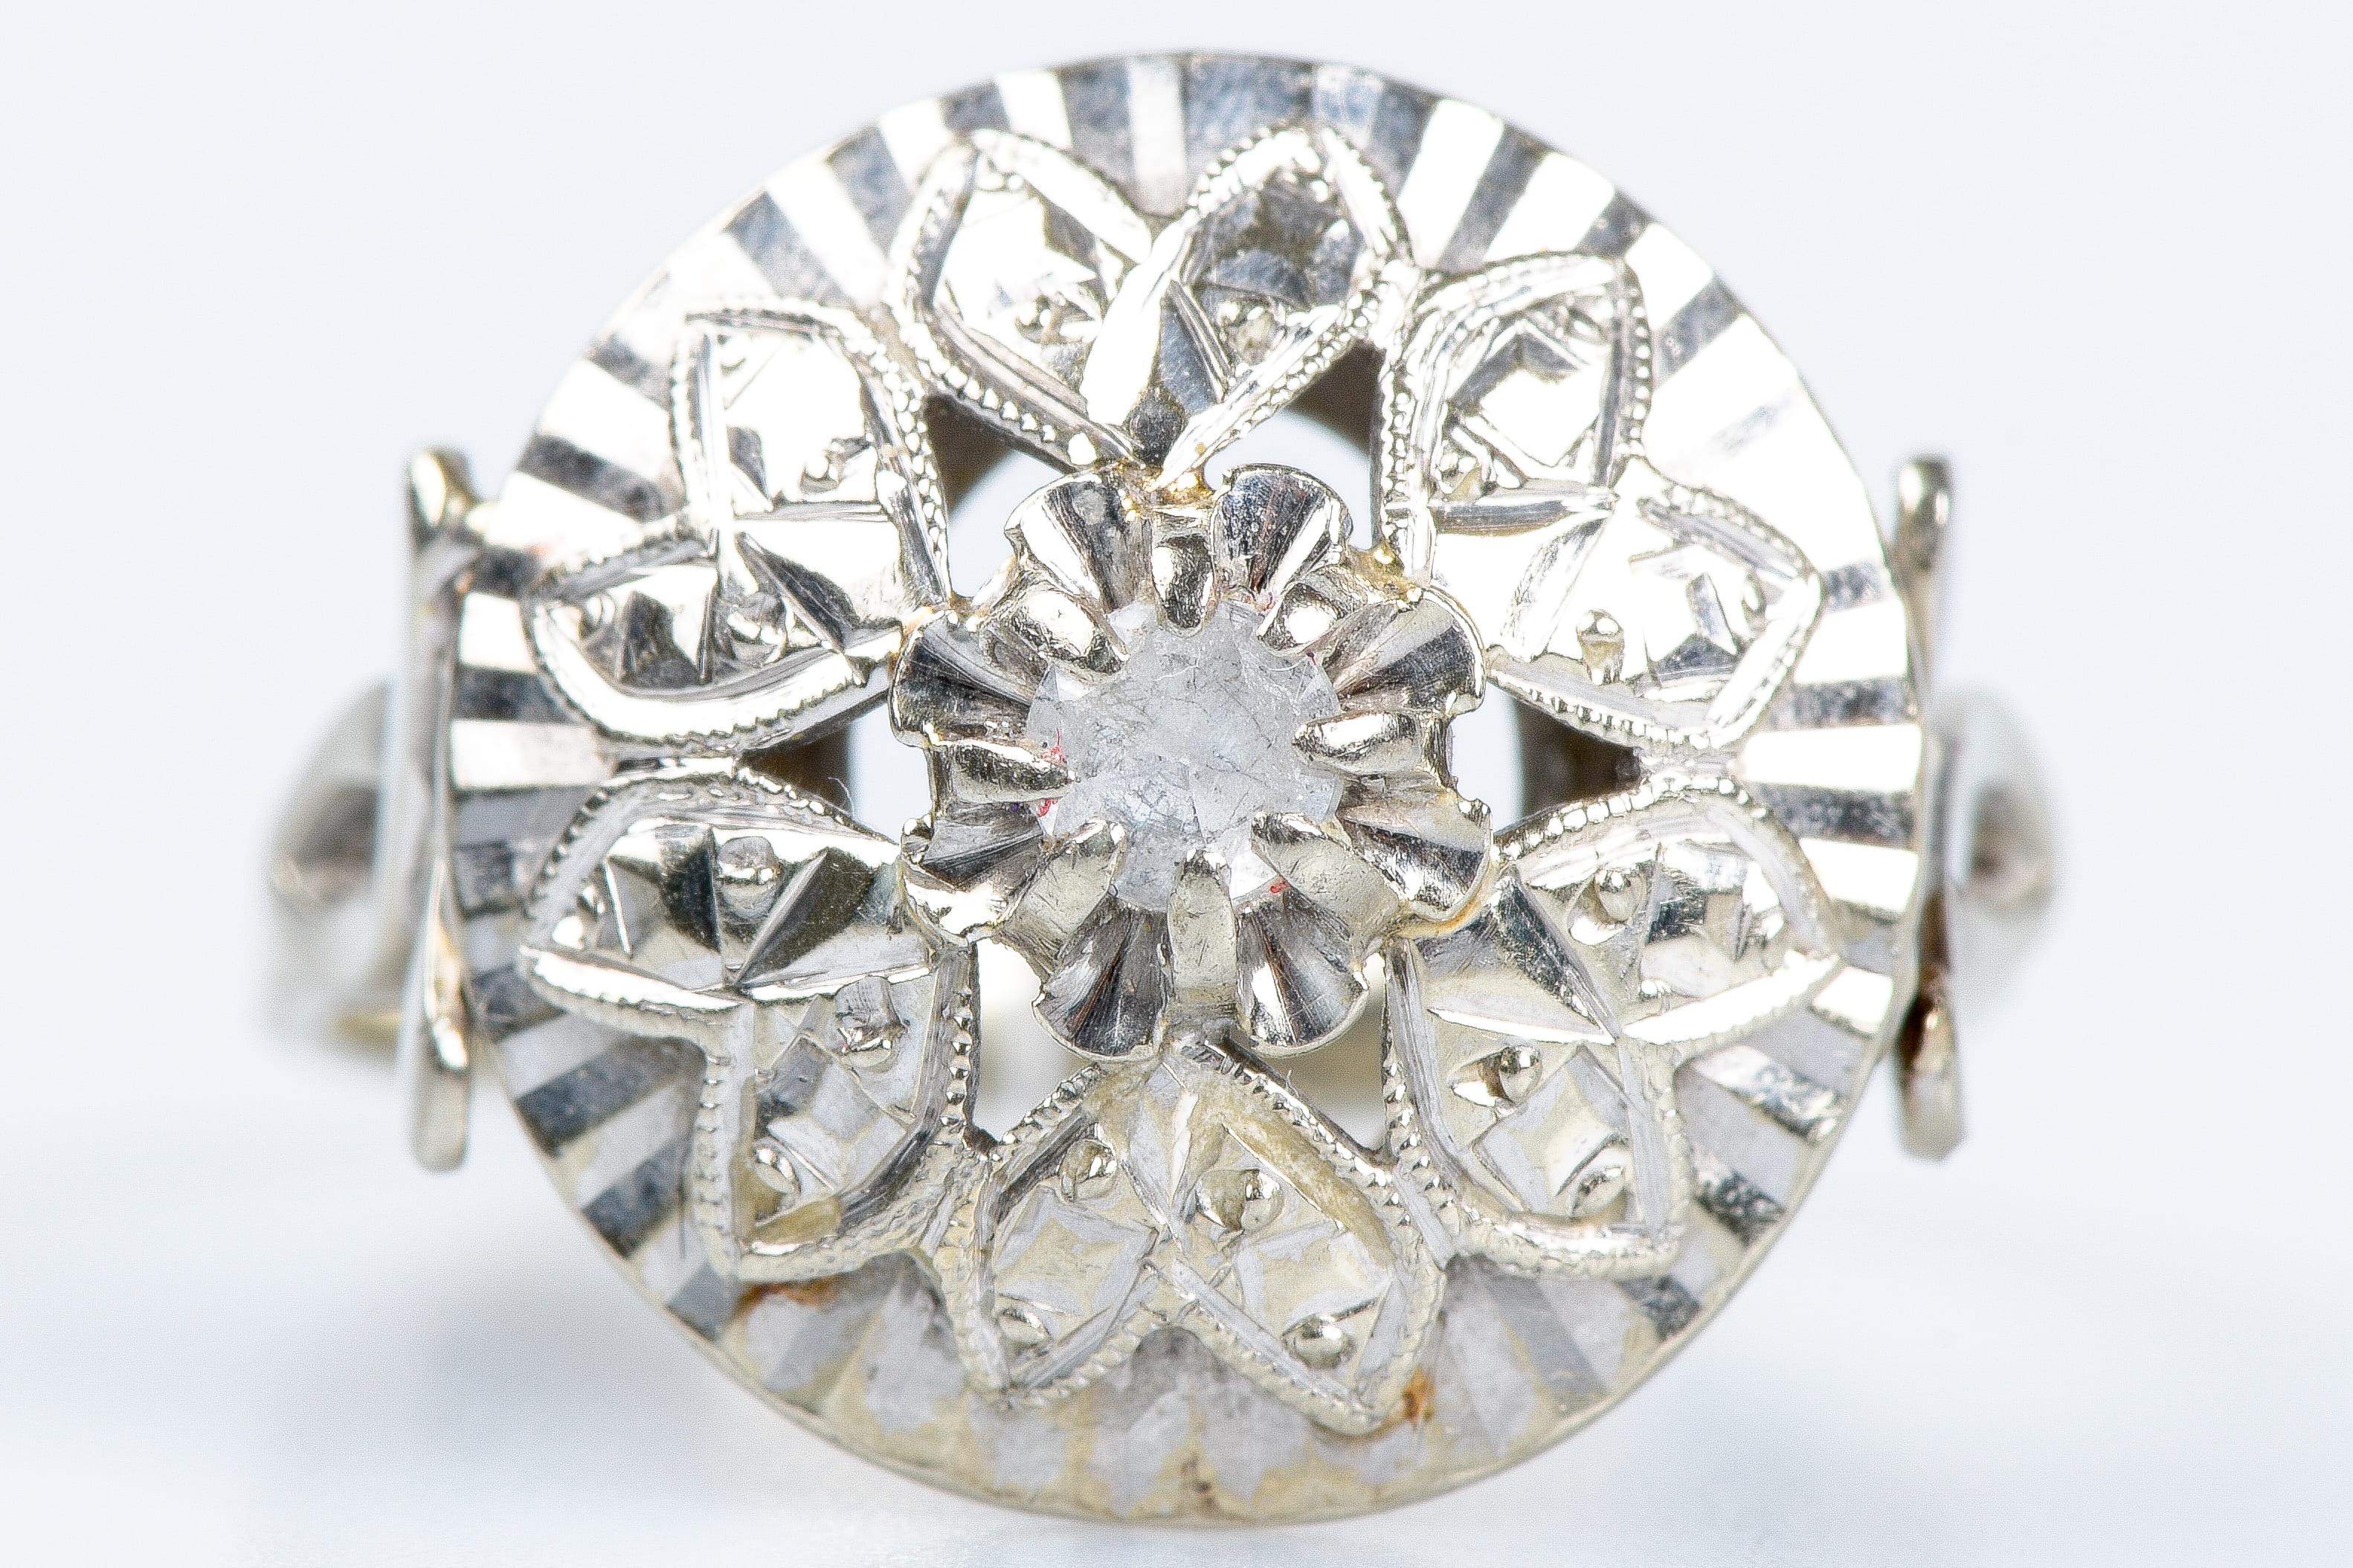 18K white gold ring with zirconium oxide.
The oxide is mounted in the center of the jewel to highlight it and make it shine, this ring is uniquely worked and the details in relief and chiseled on the structure as well as its atypical design give it